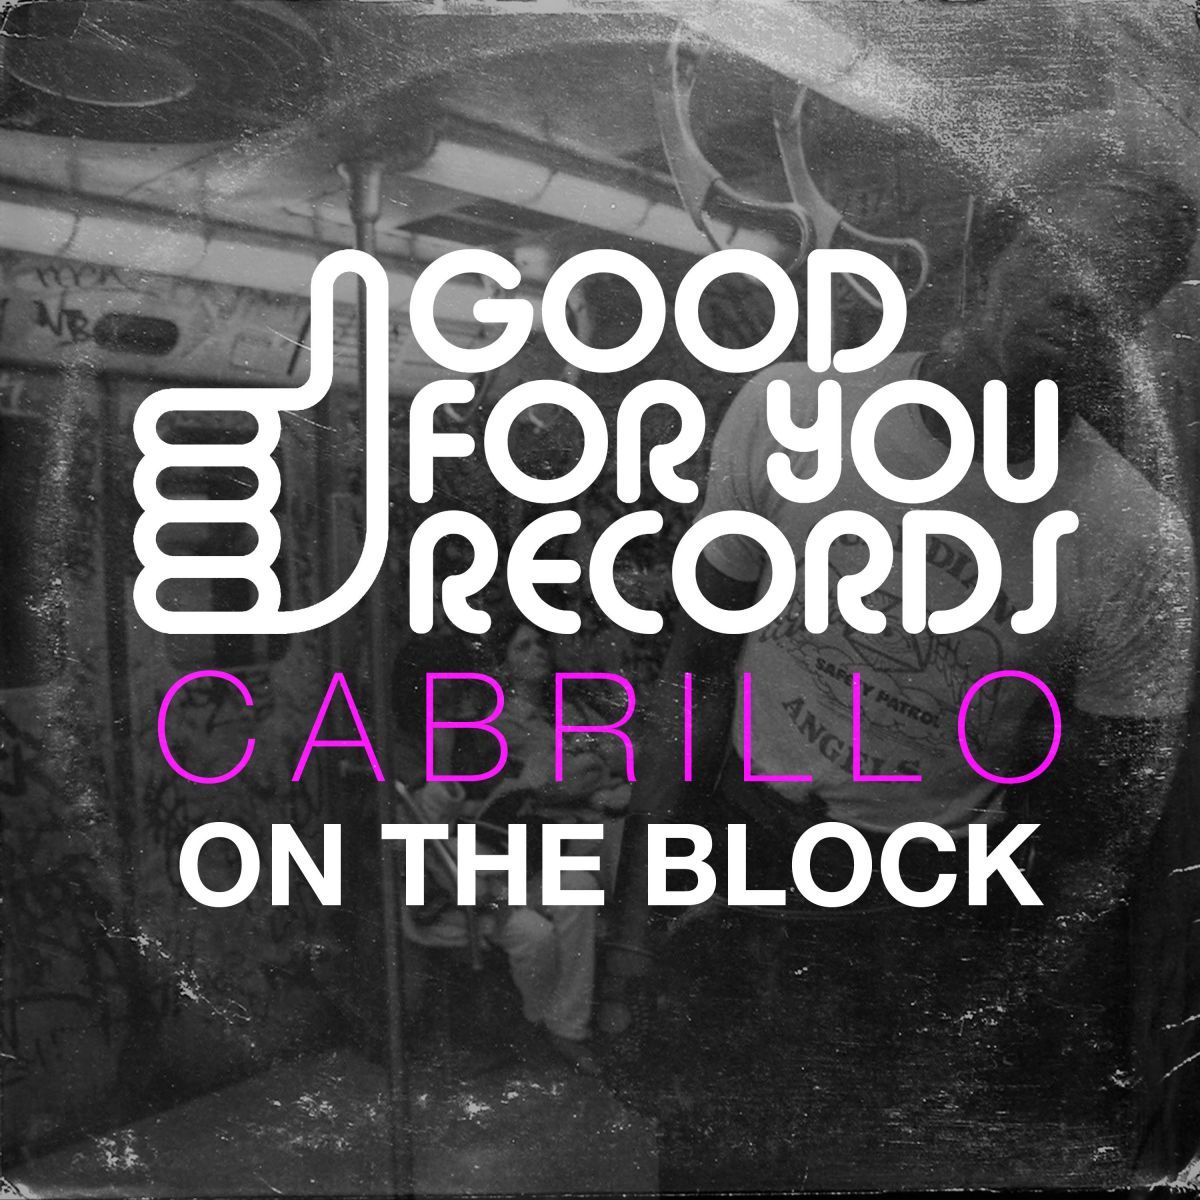 Cabrillo - On The Block / Good For You Records